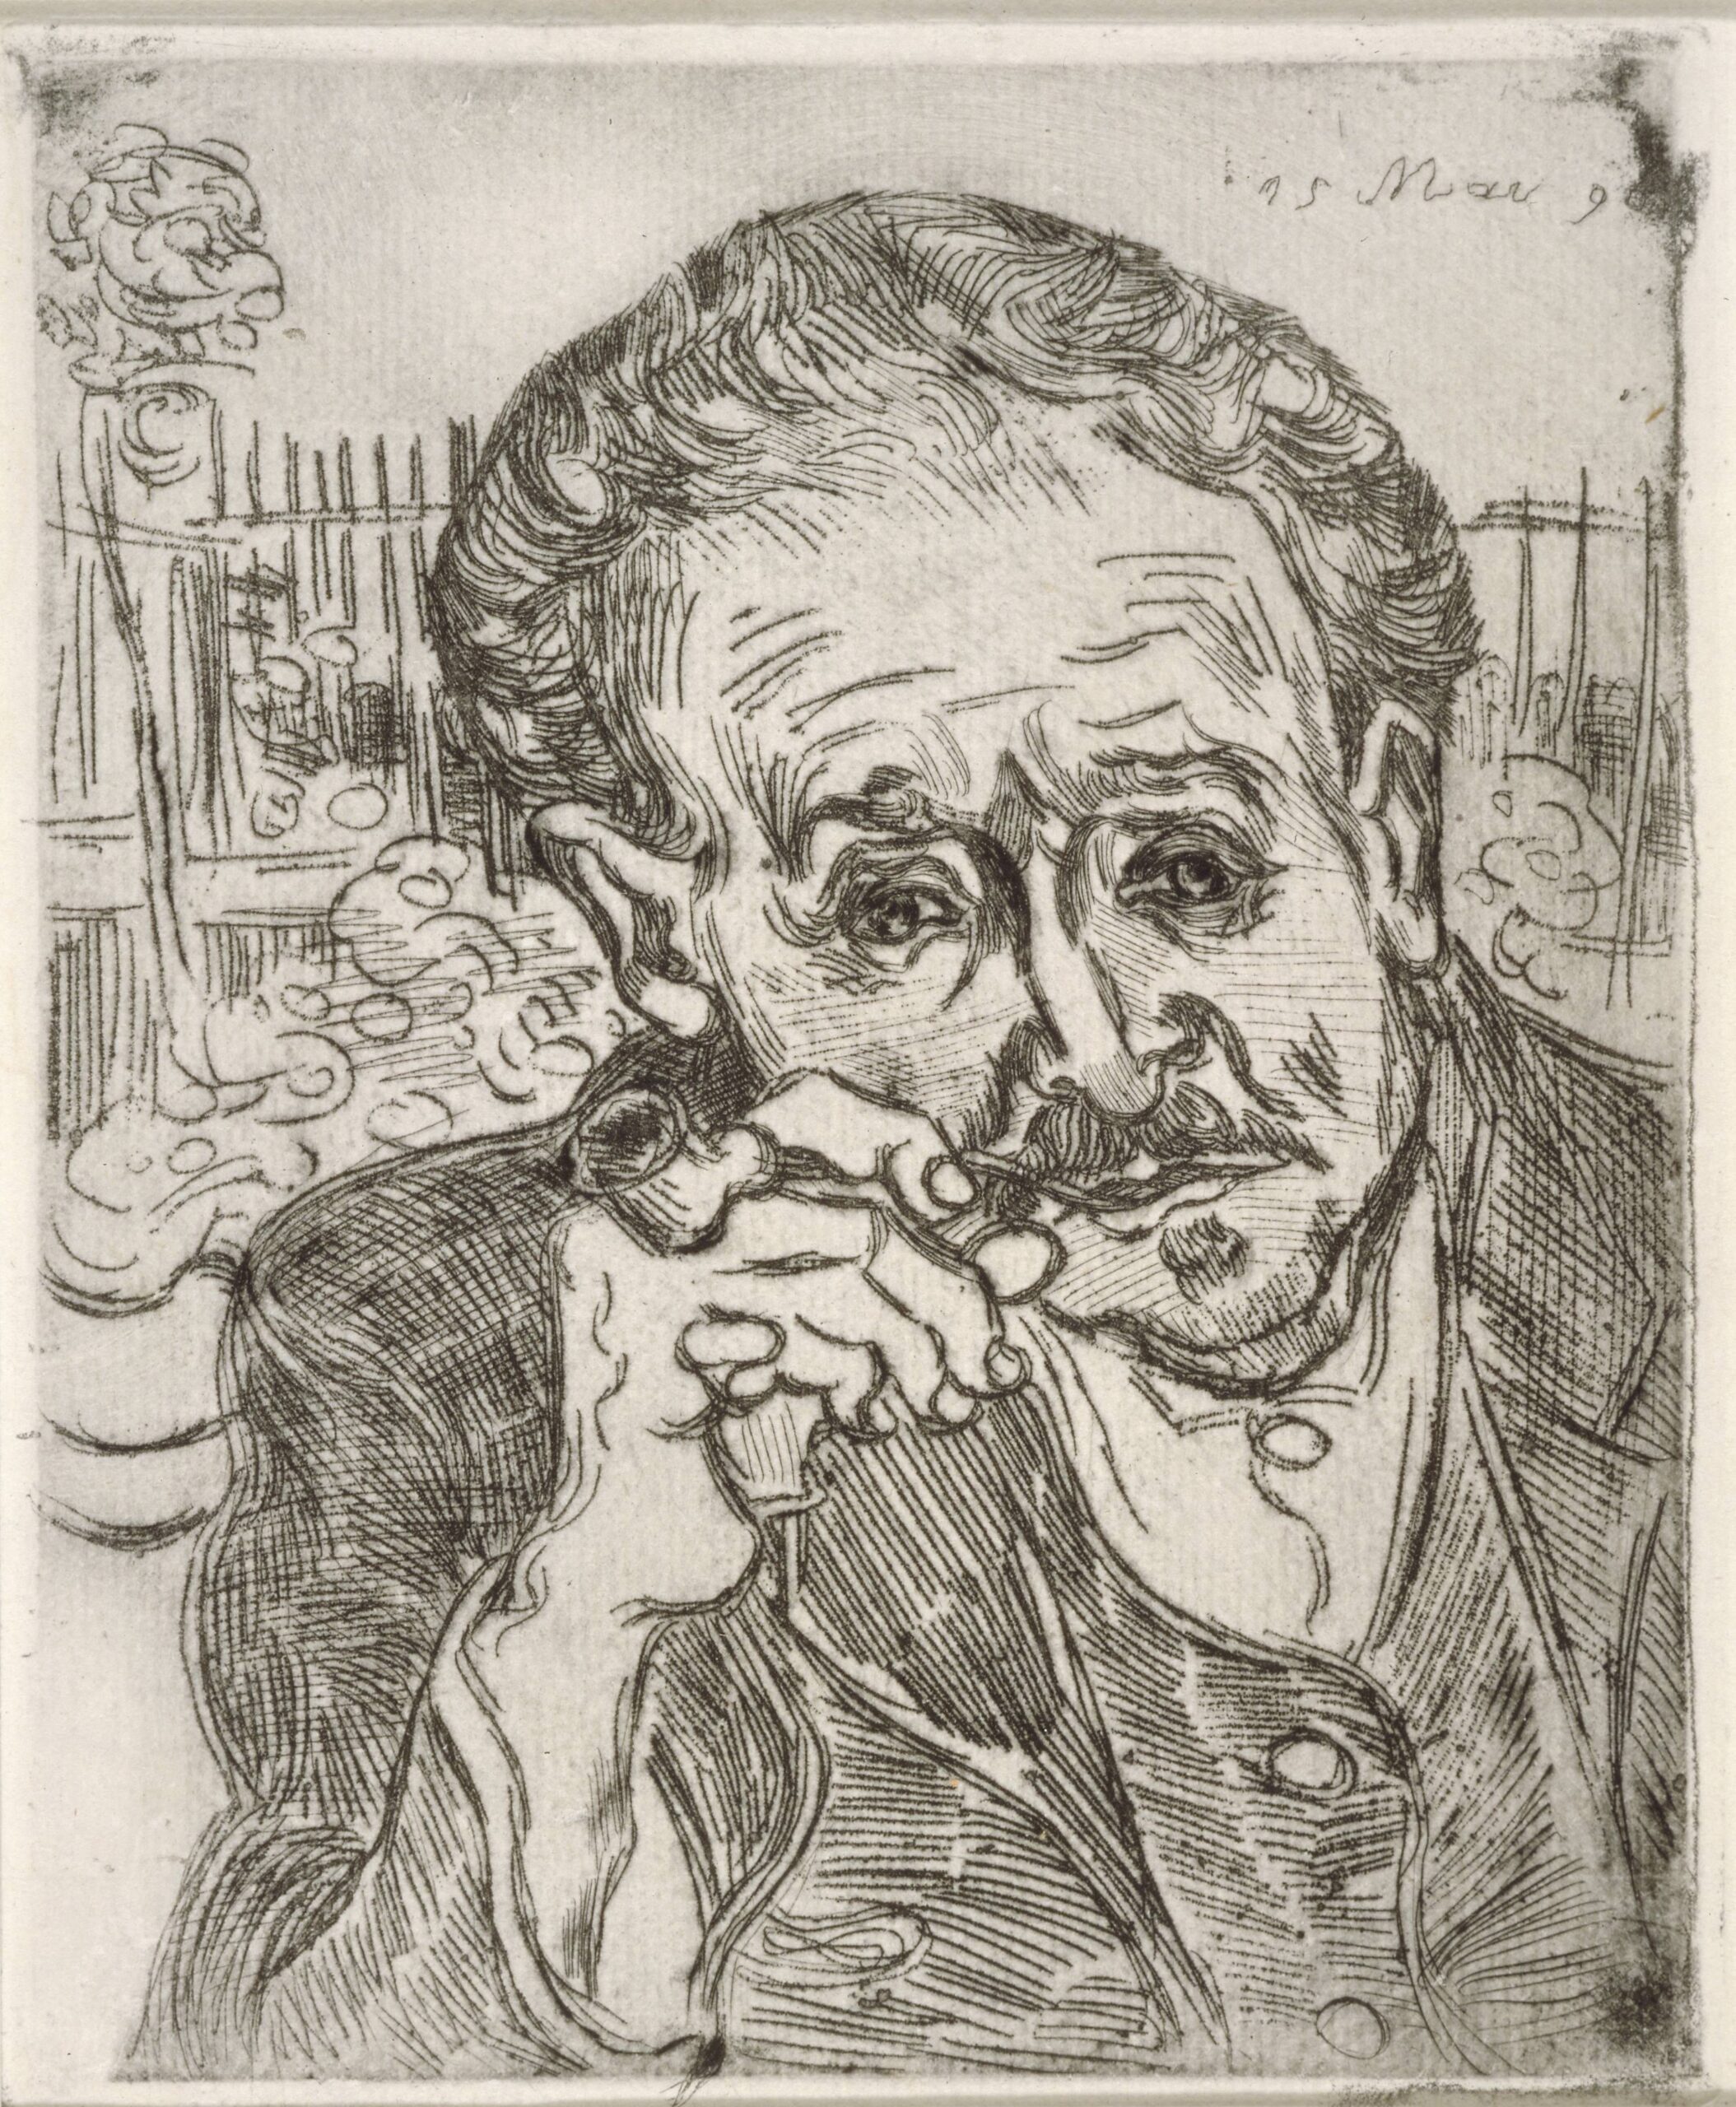 Vincent van Gogh (Dutch, 1853–1890), Portrait of Dr. Gachet (Auvers-sur-Oise), May 15, 1890. Etching, 7 × 5 3/8 in. Lent by the Minneapolis Institute of Art, Gift of Bruce B. Dayton, 1962, P.13.251.